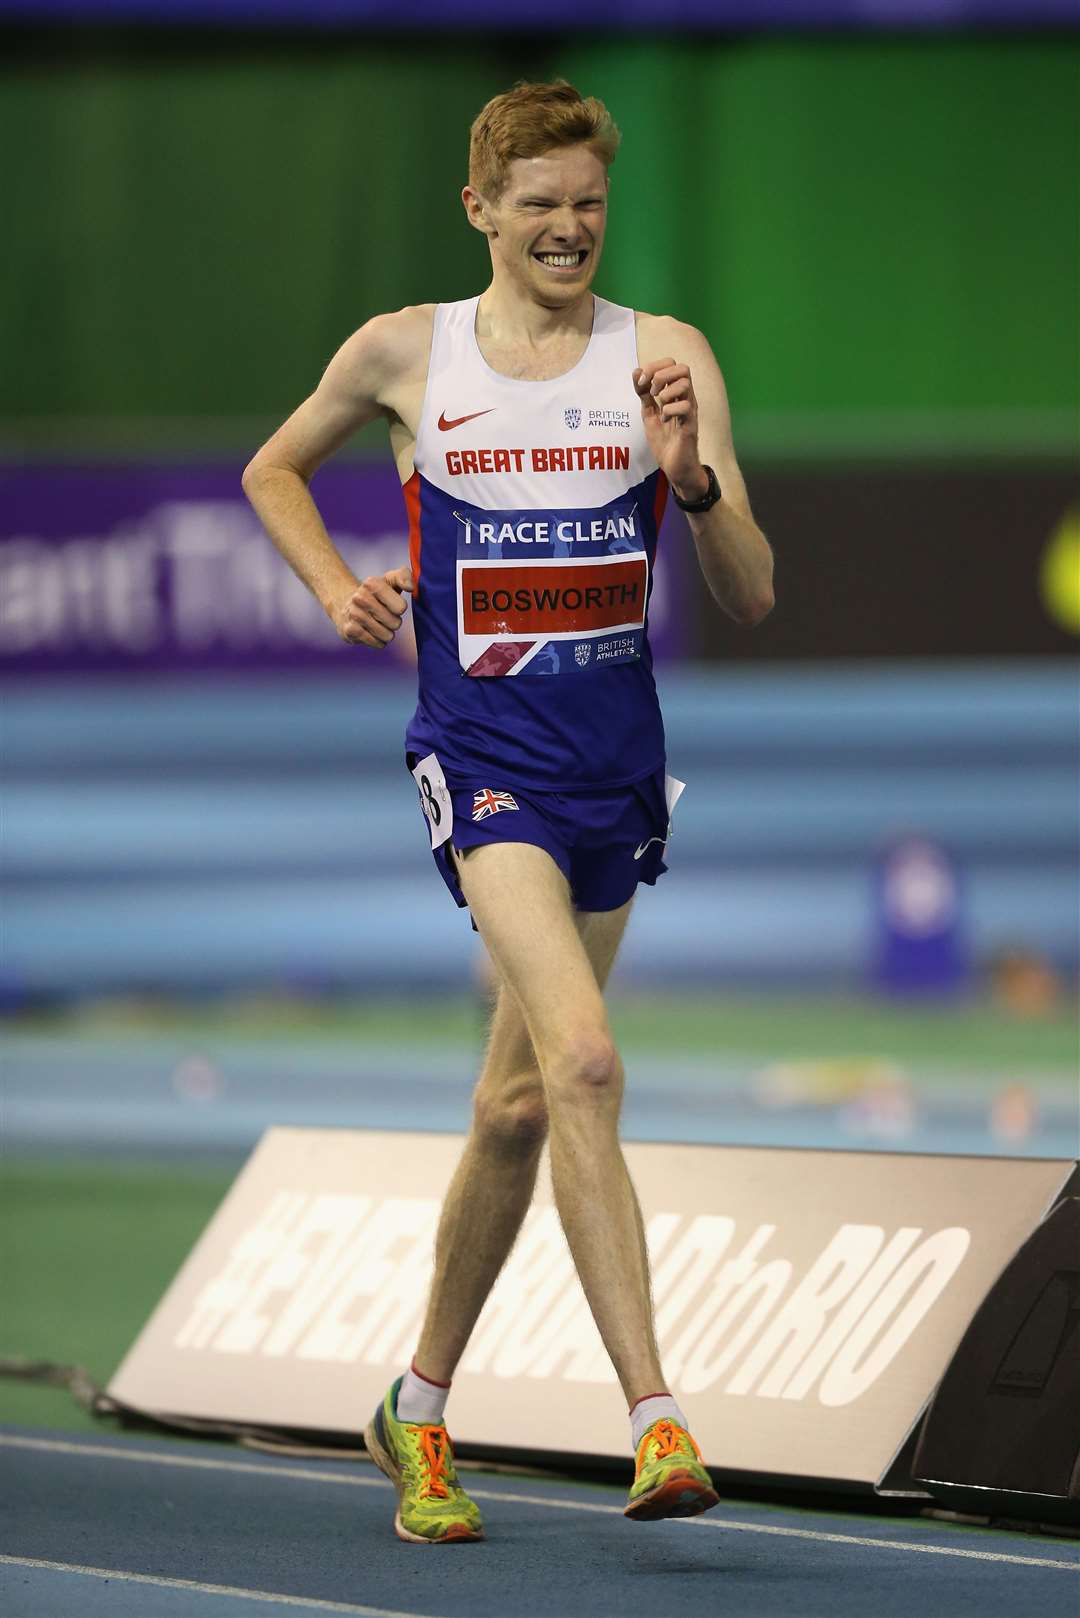 Race walker Tom Bosworth, from Sevenoaks, put the disappointment of missing London 2012 and finished sixth in Rio before getting engaged on Copacabana beach. Picture: Tom Shaw/British Athletics/Getty Images